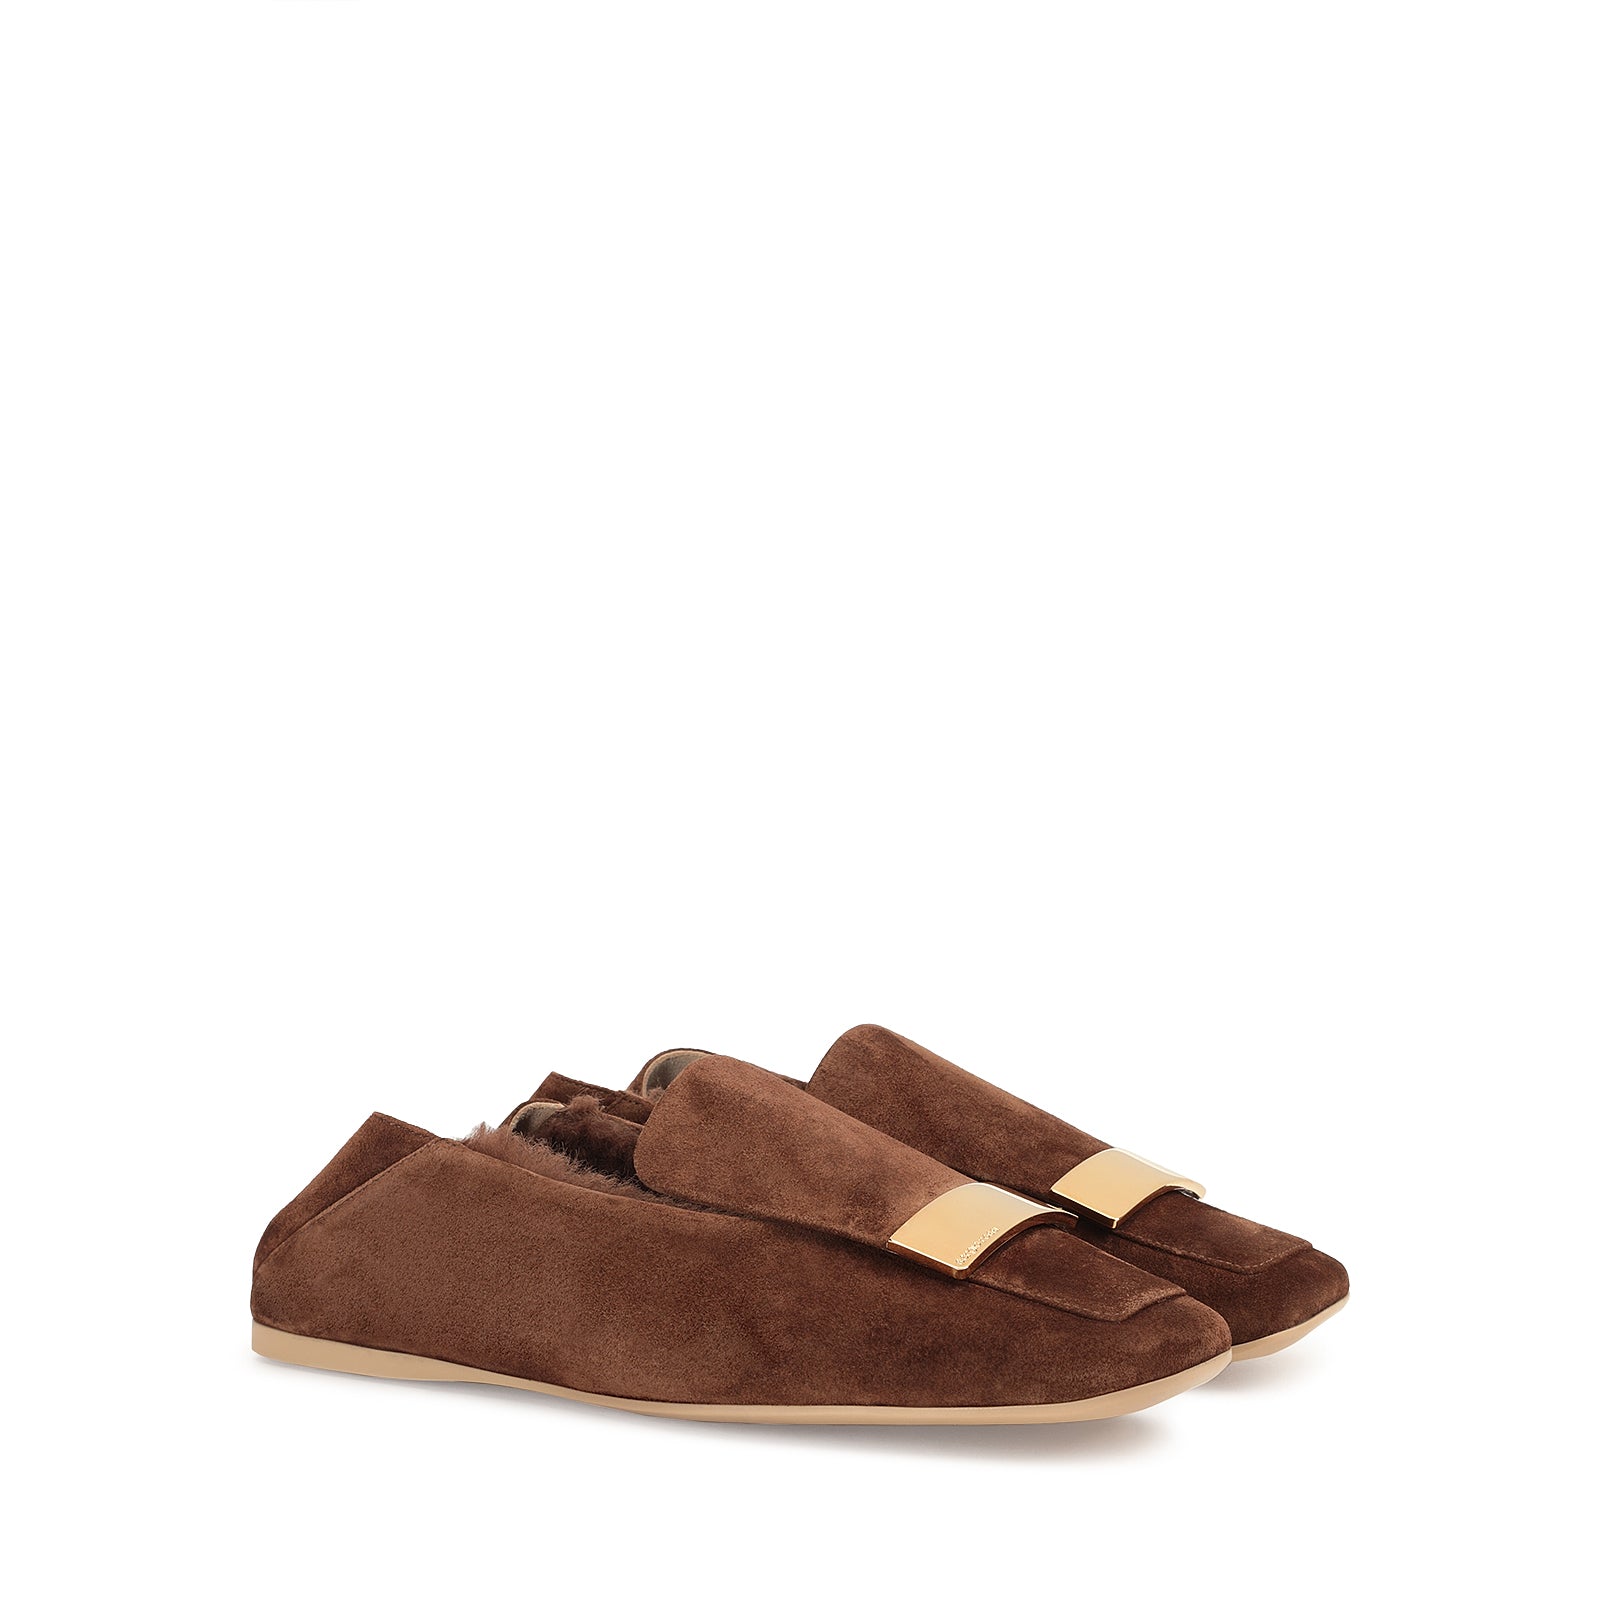 Suede Sr1 loafers - Cocoa